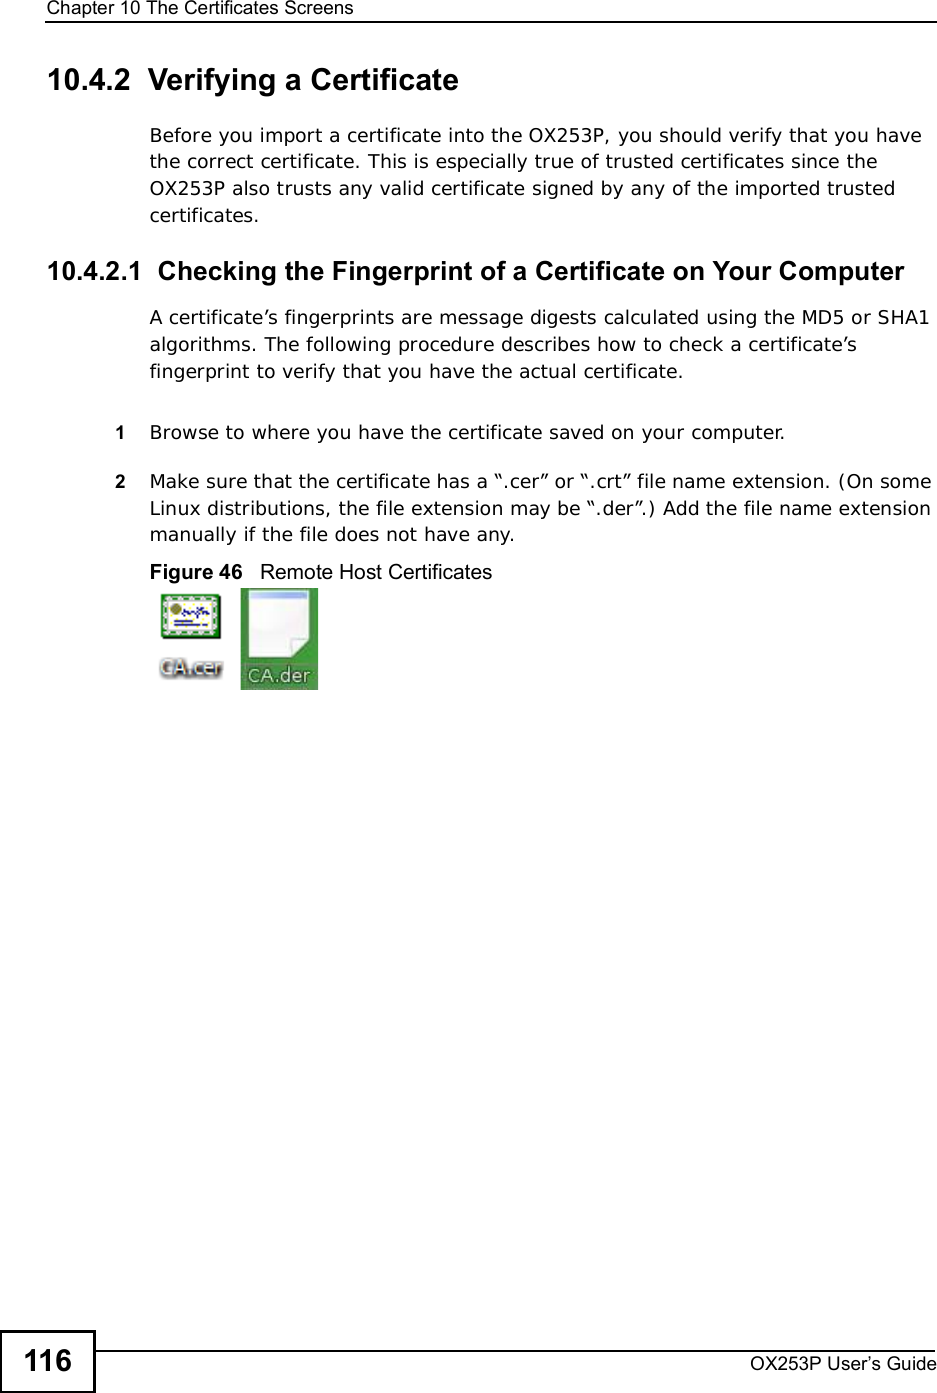 Chapter 10The Certificates ScreensOX253P User’s Guide11610.4.2  Verifying a CertificateBefore you import a certificate into the OX253P, you should verify that you have the correct certificate. This is especially true of trusted certificates since the OX253P also trusts any valid certificate signed by any of the imported trusted certificates.10.4.2.1  Checking the Fingerprint of a Certificate on Your ComputerA certificate’s fingerprints are message digests calculated using the MD5 or SHA1 algorithms. The following procedure describes how to check a certificate’s fingerprint to verify that you have the actual certificate. 1Browse to where you have the certificate saved on your computer. 2Make sure that the certificate has a “.cer” or “.crt” file name extension. (On some Linux distributions, the file extension may be “.der”.) Add the file name extension manually if the file does not have any.Figure 46   Remote Host Certificates